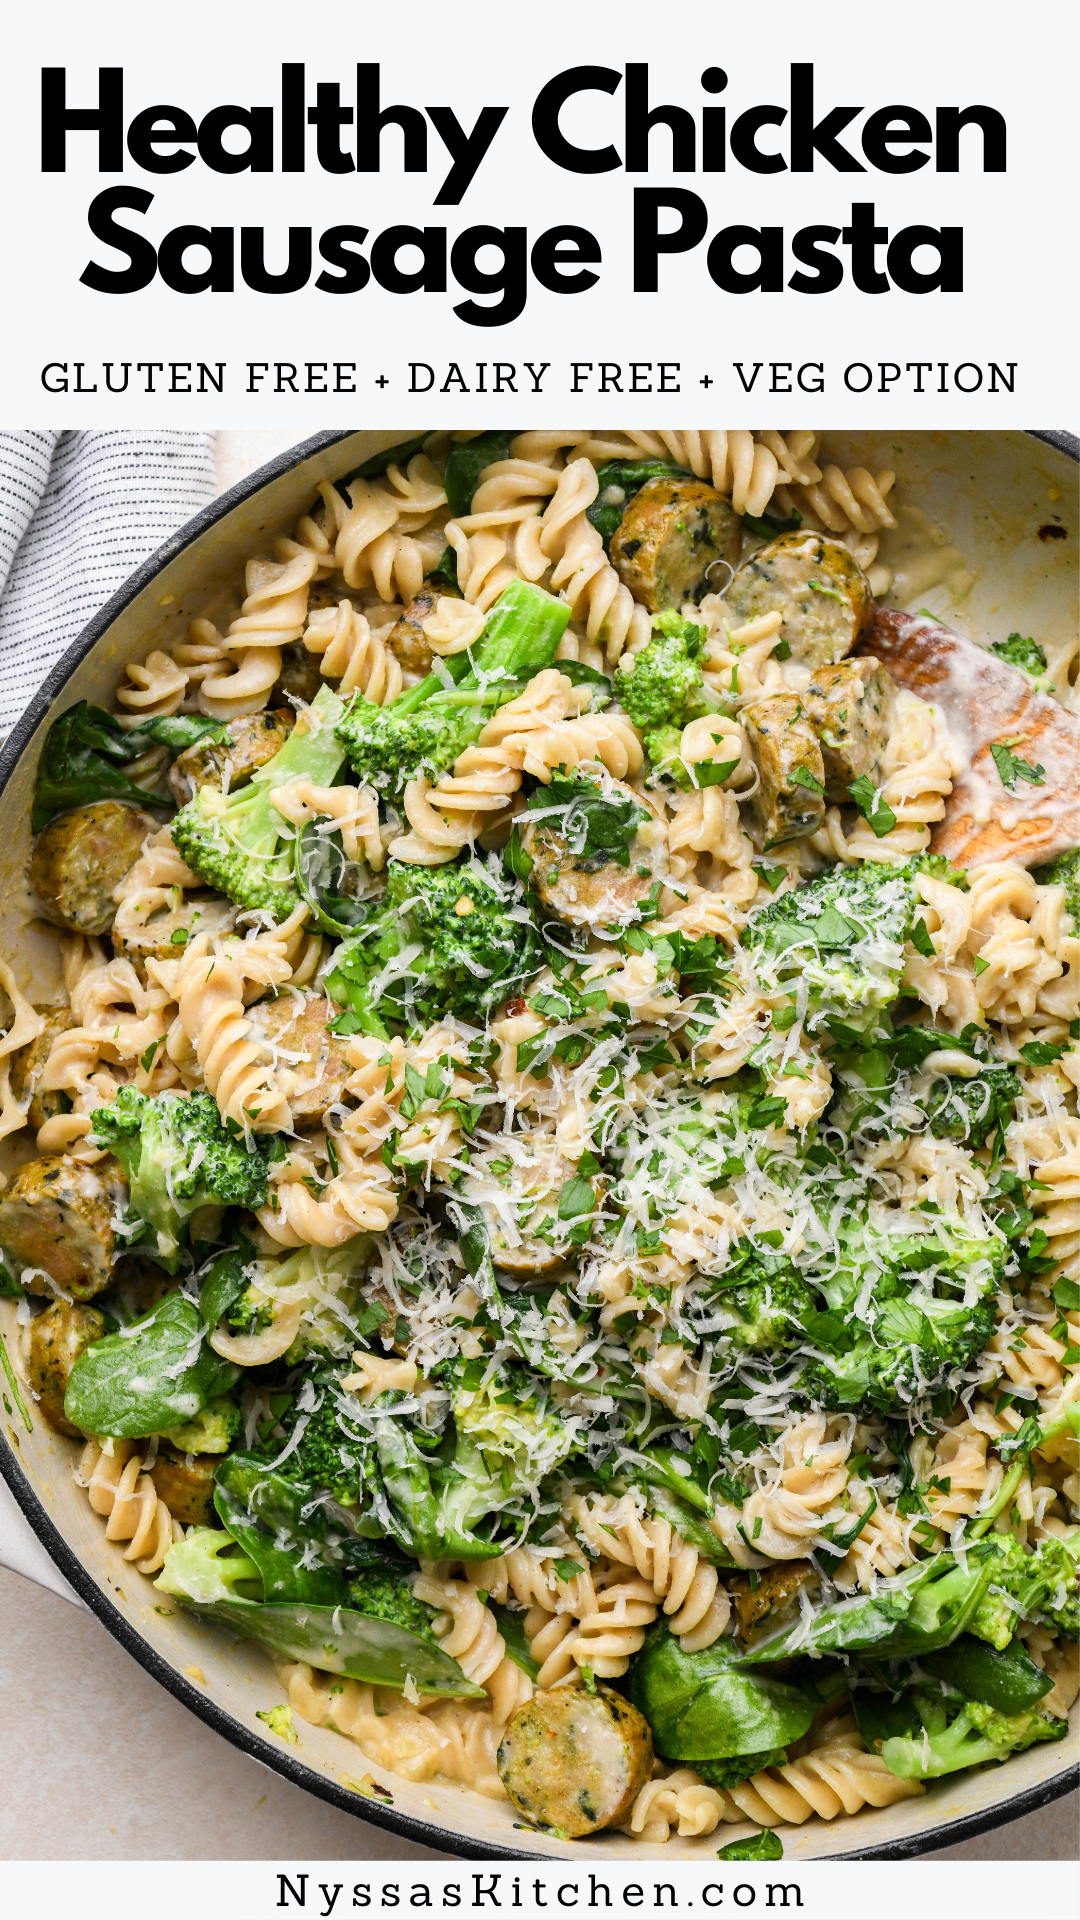 This healthy chicken sausage pasta skillet is an easy dinner recipe idea made with a dairy free cashew cream sauce and lots of veggies! Super flavorful, totally customizable, and ready in about 30 minutes. Gluten free, dairy free, and vegan option.